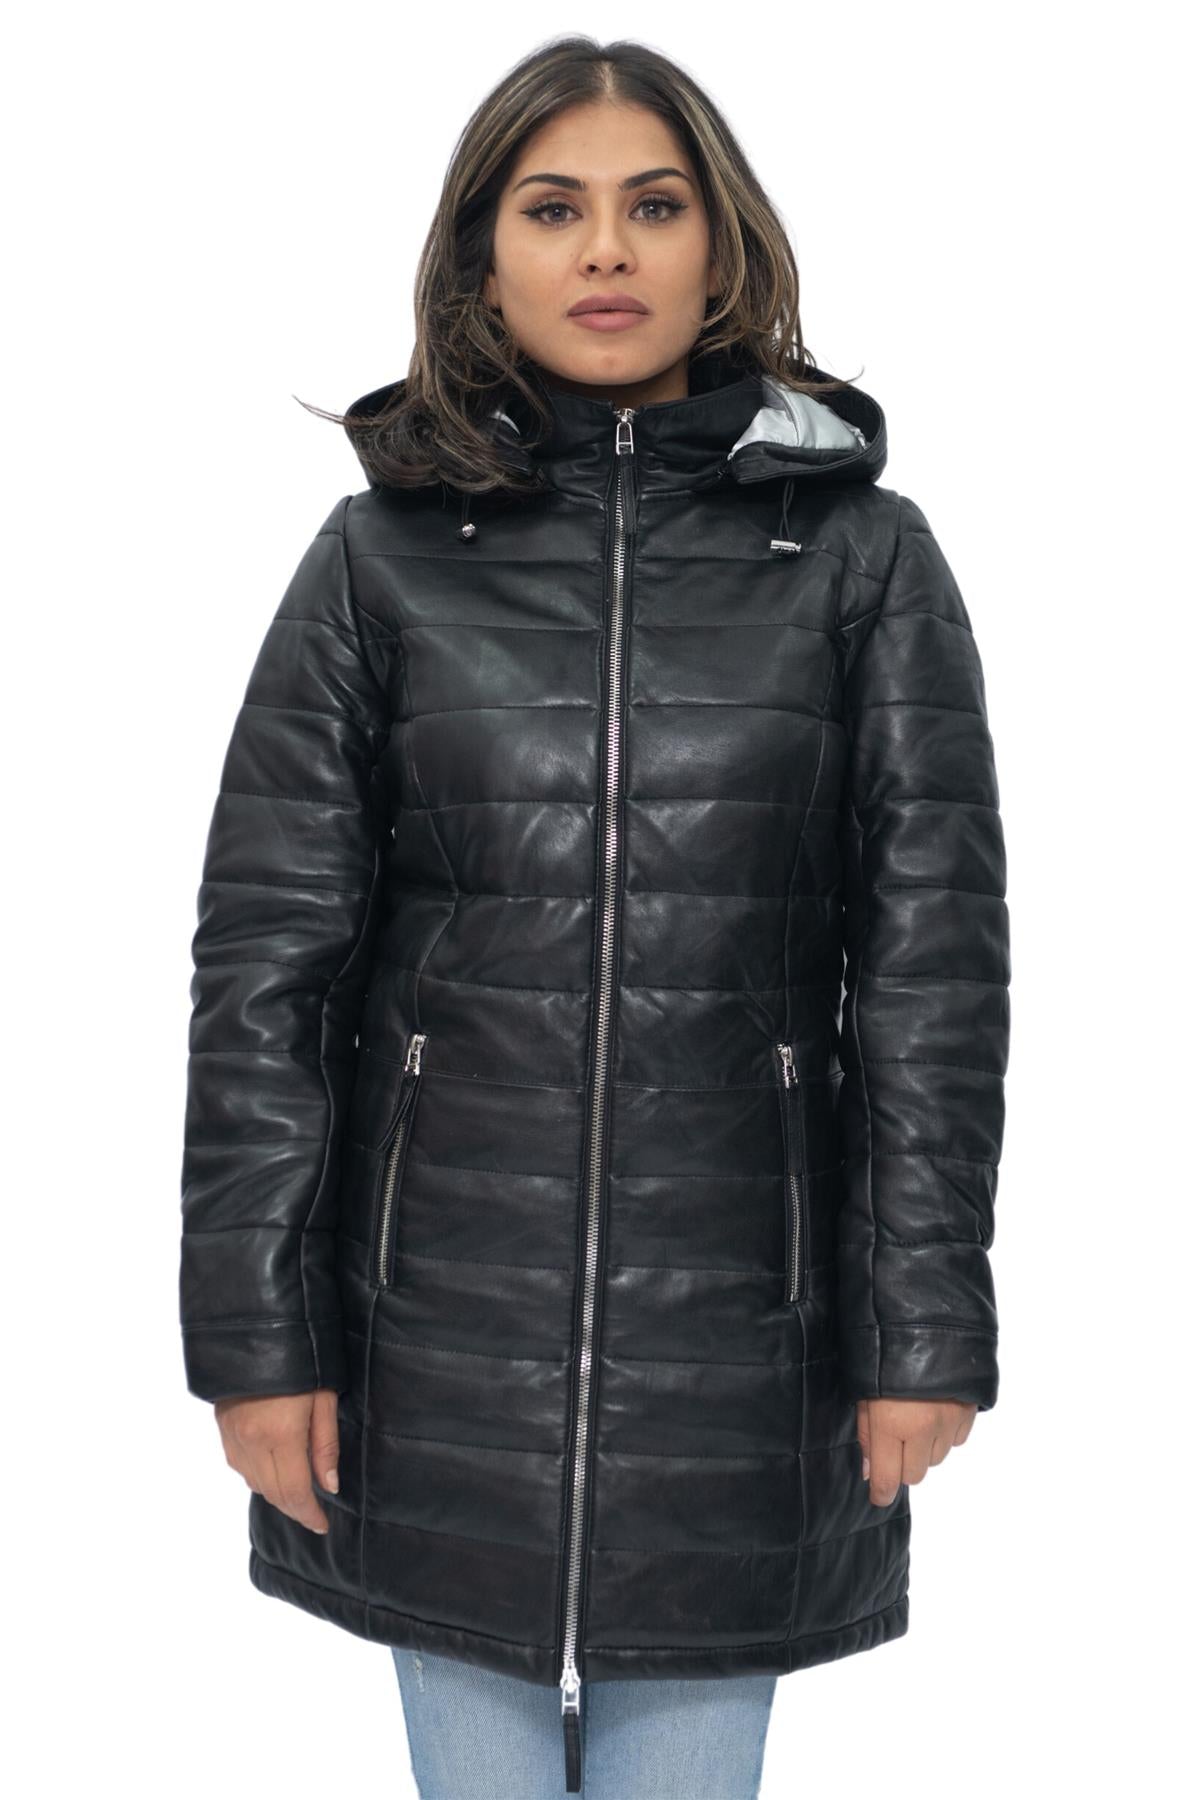 Womens Leather Puffer Parka Jacket-Andria